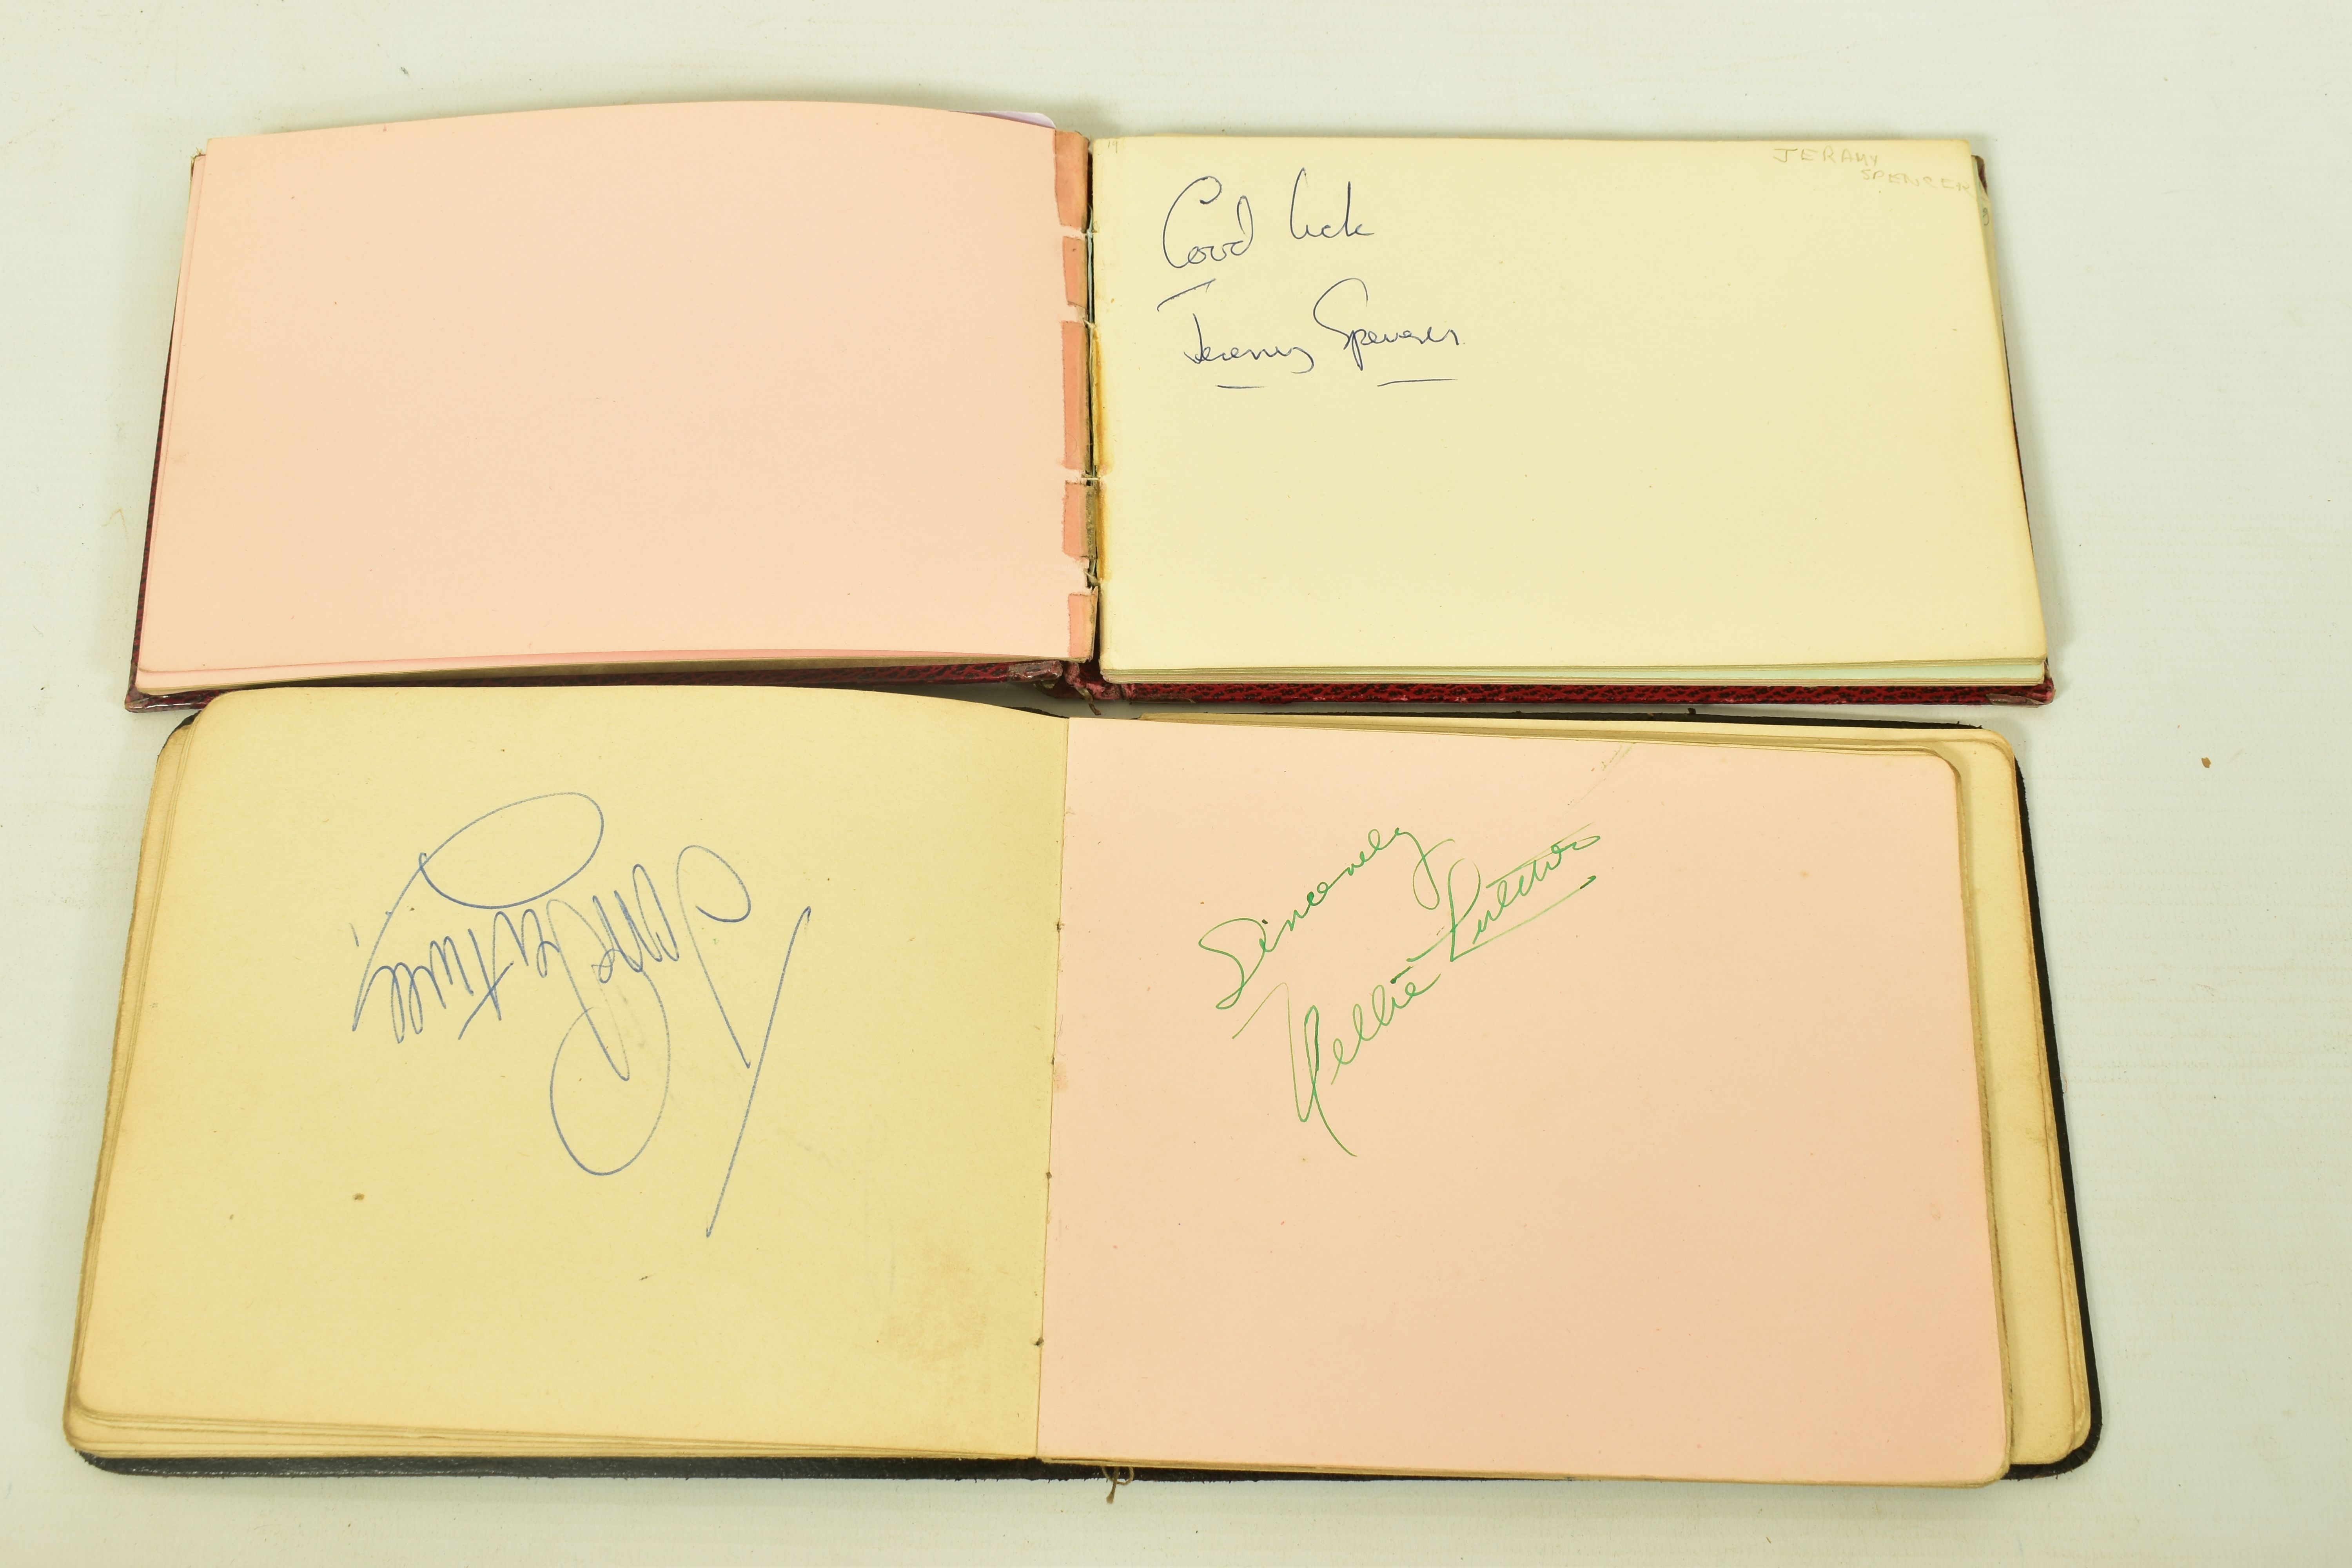 FILM & STAGE AUTOGRAPH ALBUM, a collection of signatures in two autograph albums featuring some of - Image 8 of 11